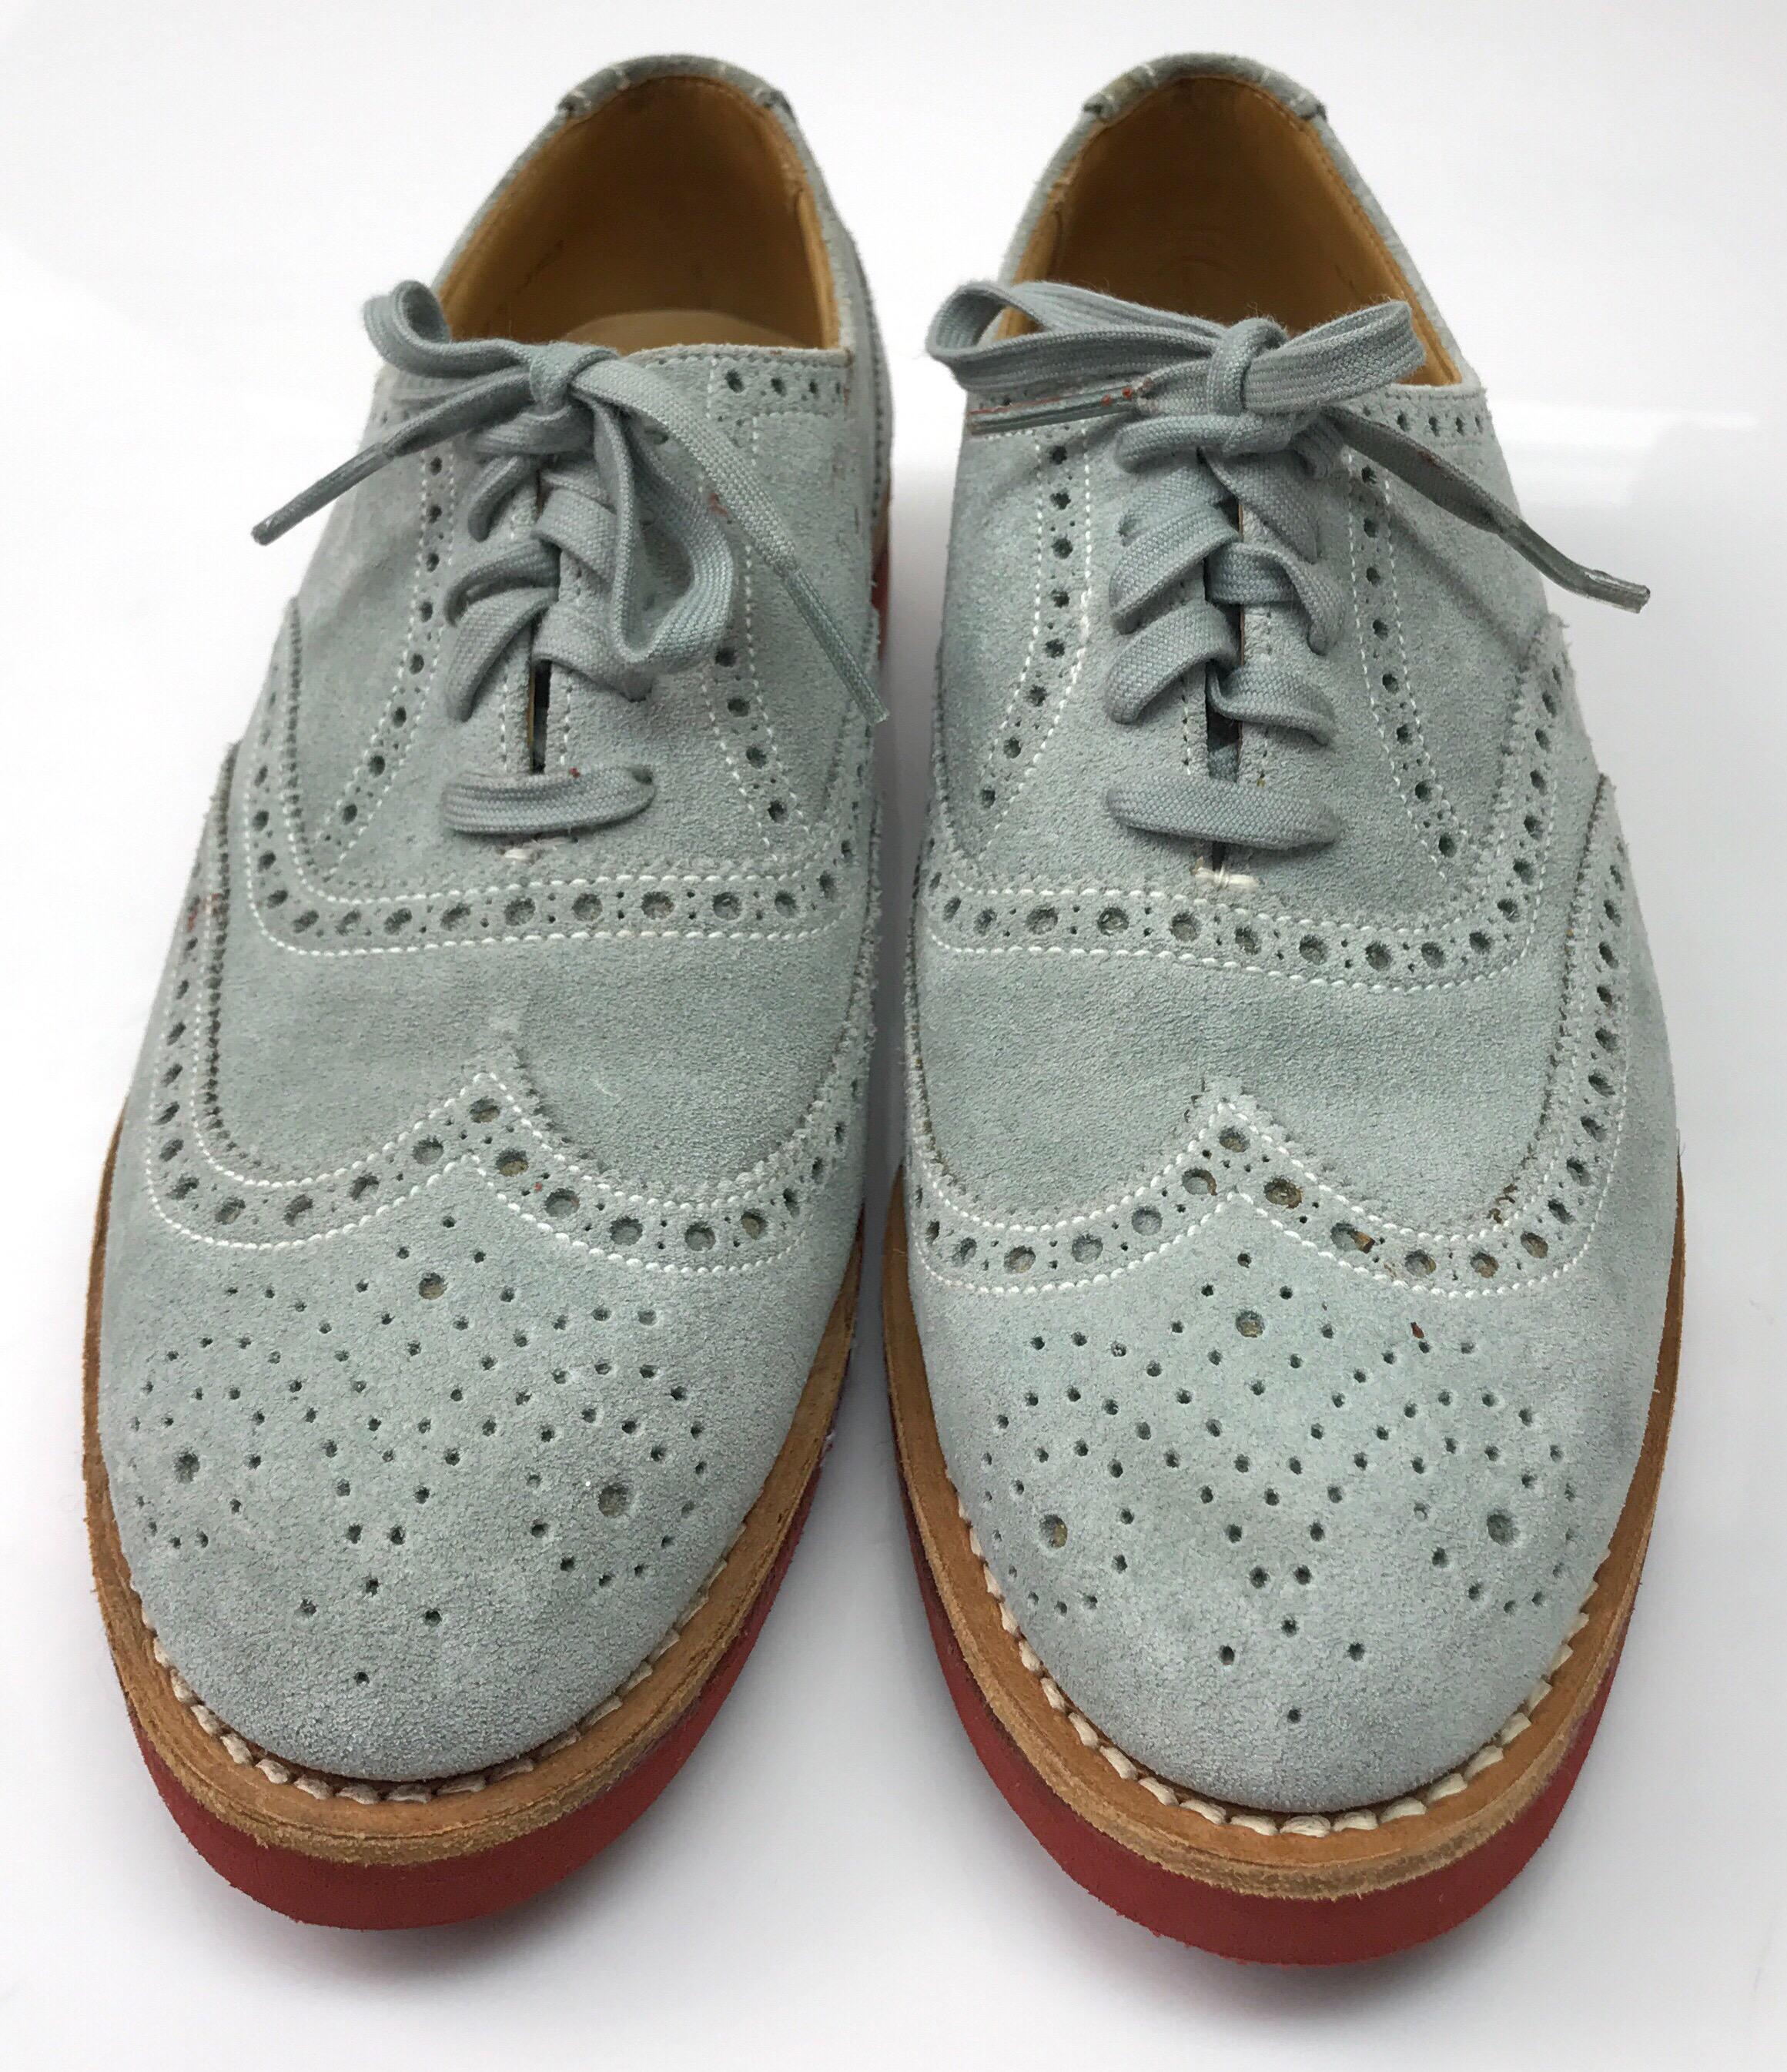 Ralph Lauren Pale Blue Suede Oxfords - 6.5. These beautiful Ralph Lauren oxfords are in good condition. There is minor red stains in a few spots, as shown in picture. These shoes are made of a pale blue suede material and have a cutout design